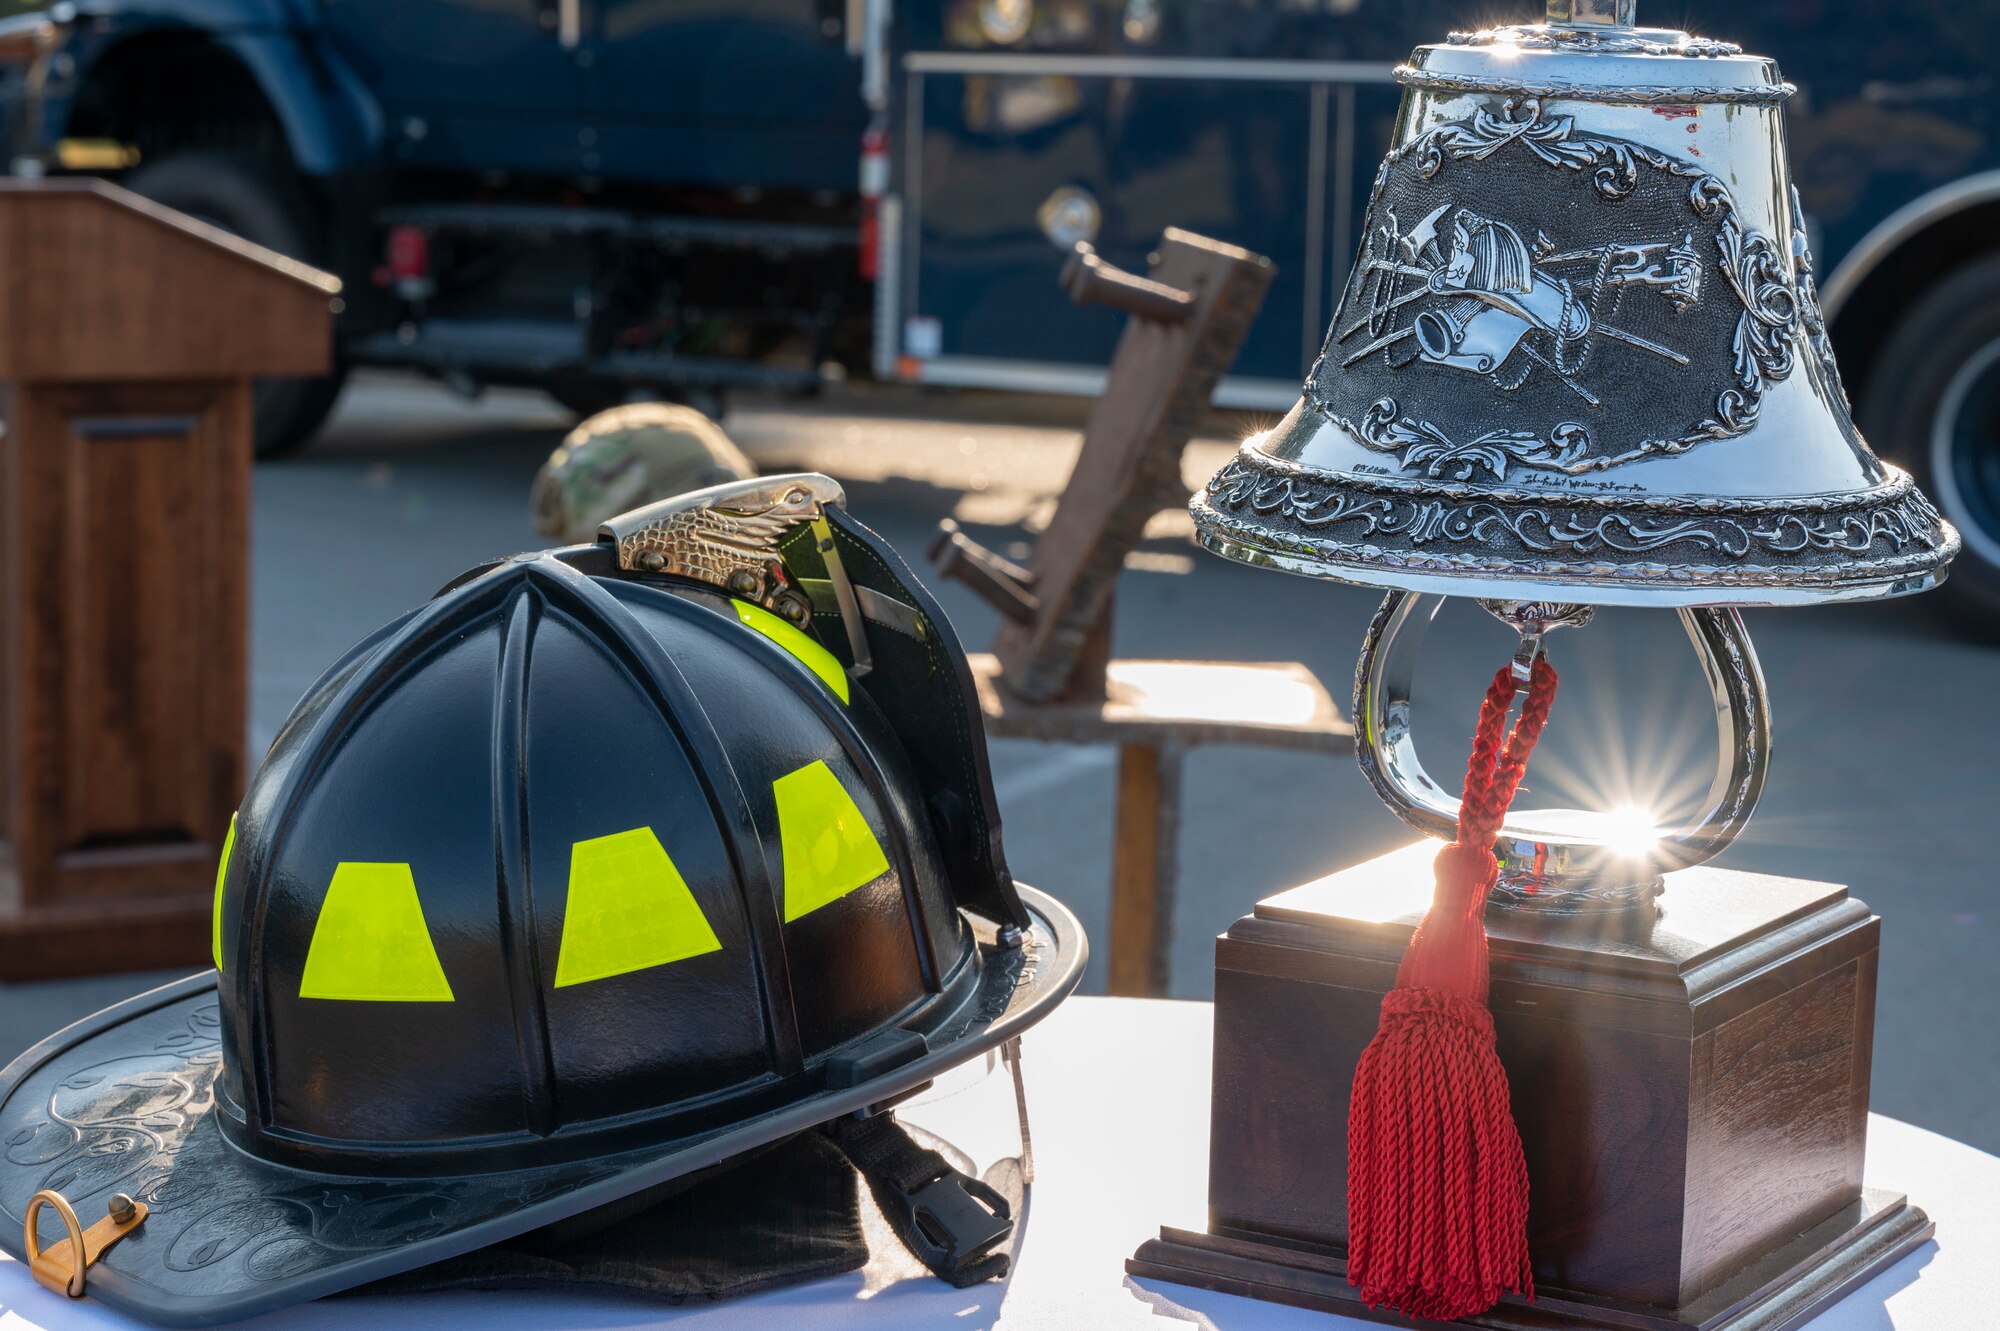 A firefighter helmet and bell are on display on a table